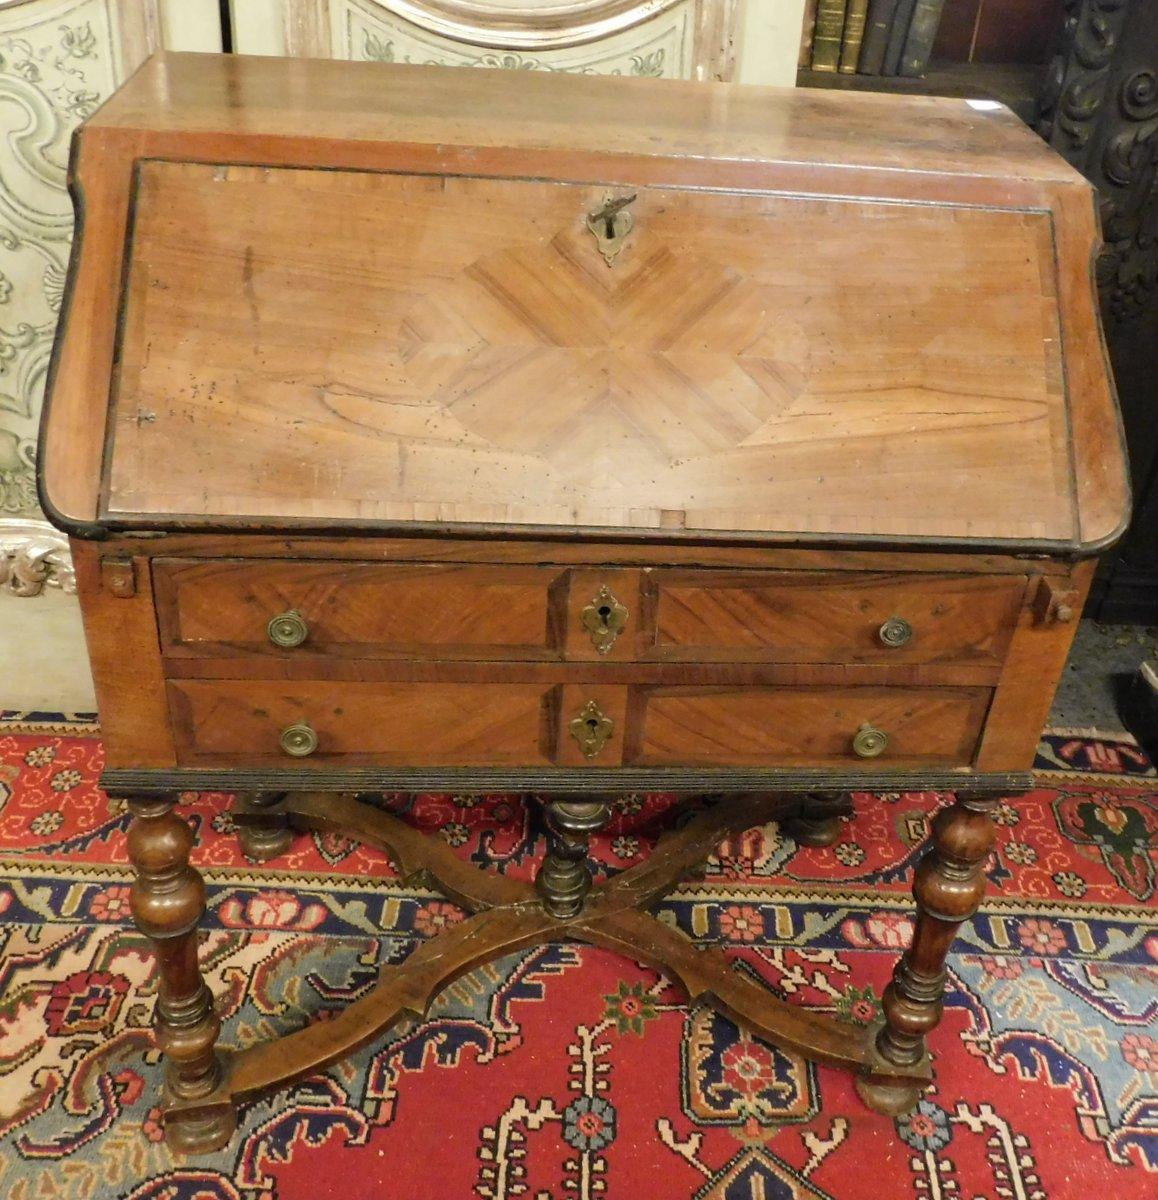 Italian Antique Flap Writing Desk in Walnut, Carved Cross Legs, Early 18th Century Italy For Sale